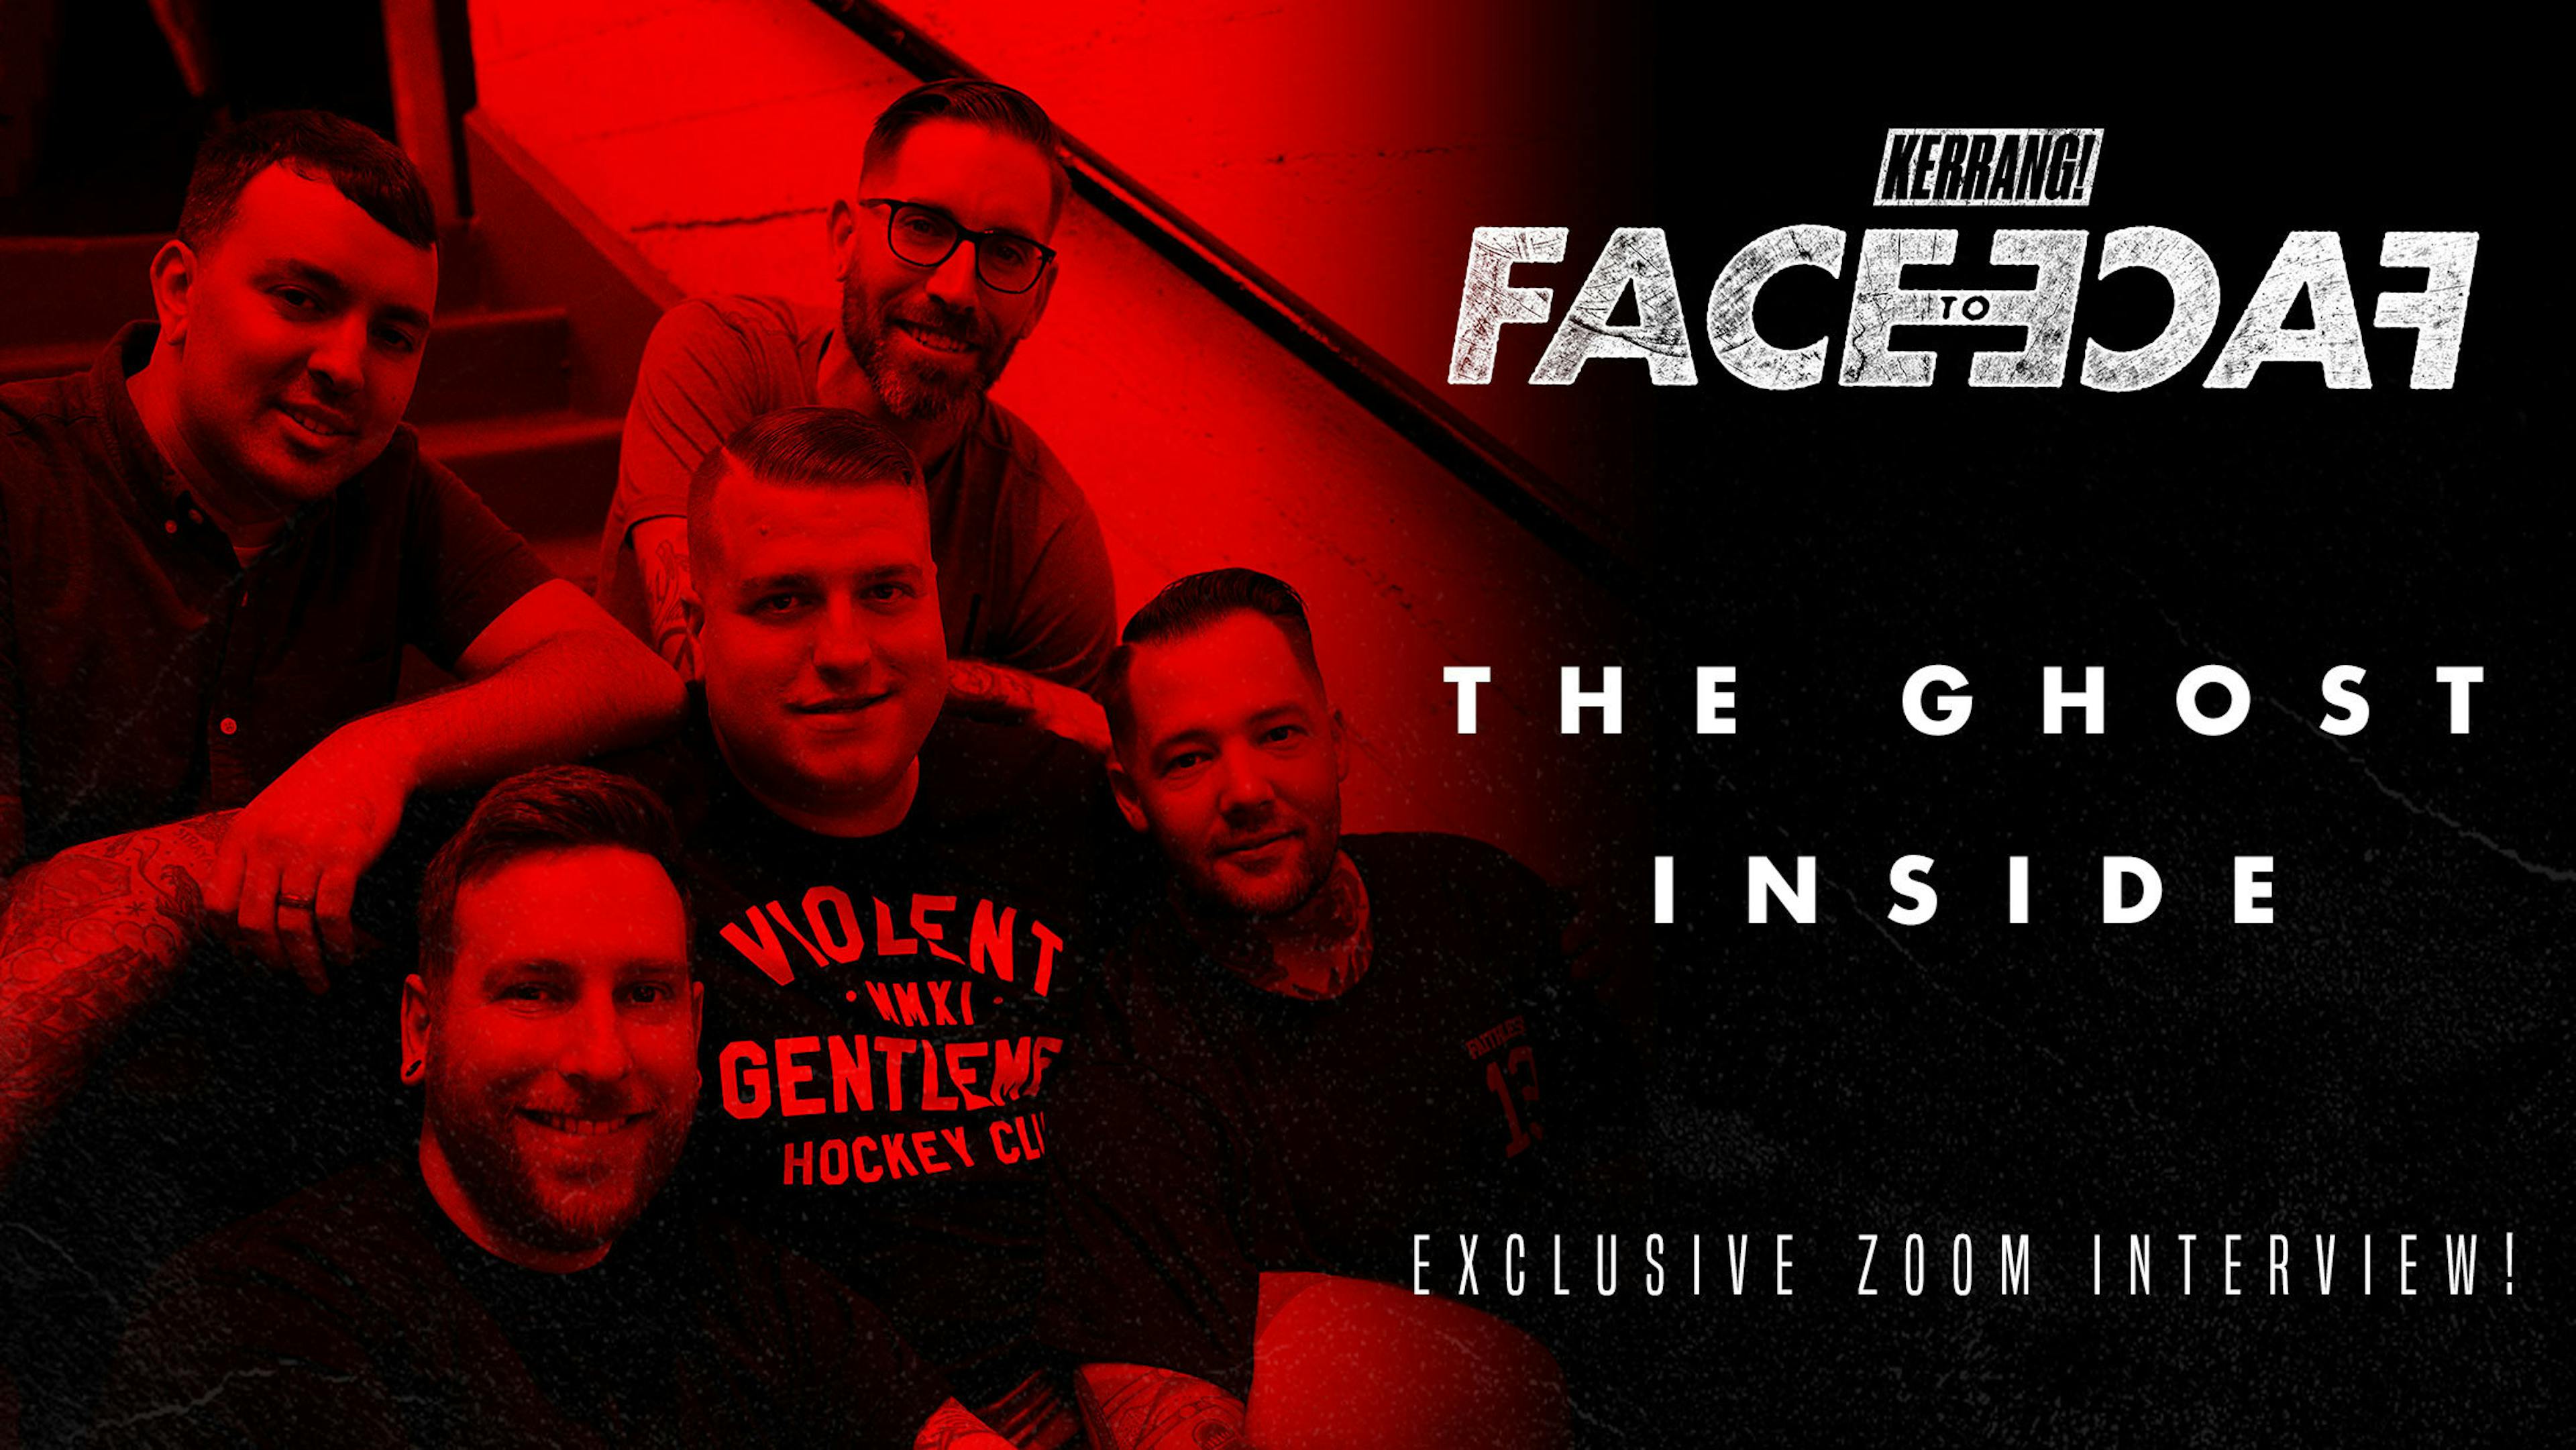 Join Our Face-To-Face Zoom Interview With The Ghost Inside